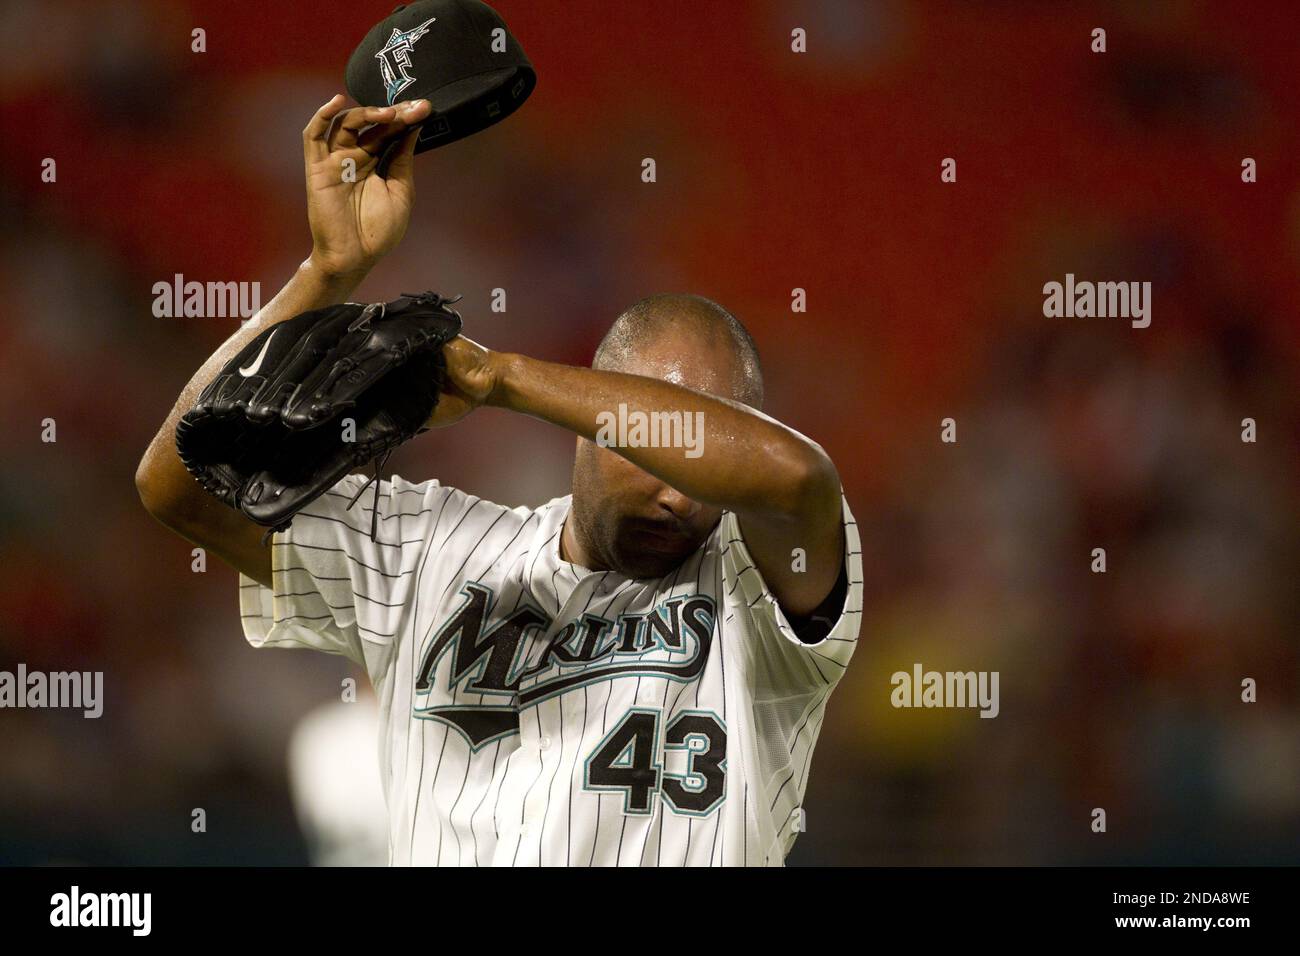 Florida Marlins Pitcher Jose Veras (#43) in the game at Citifield in  Flushing, NY. The Marlins defeated the Mets 7-6. (Credit Image: © Anthony  Gruppuso/Southcreek Global/ZUMApress.com Stock Photo - Alamy